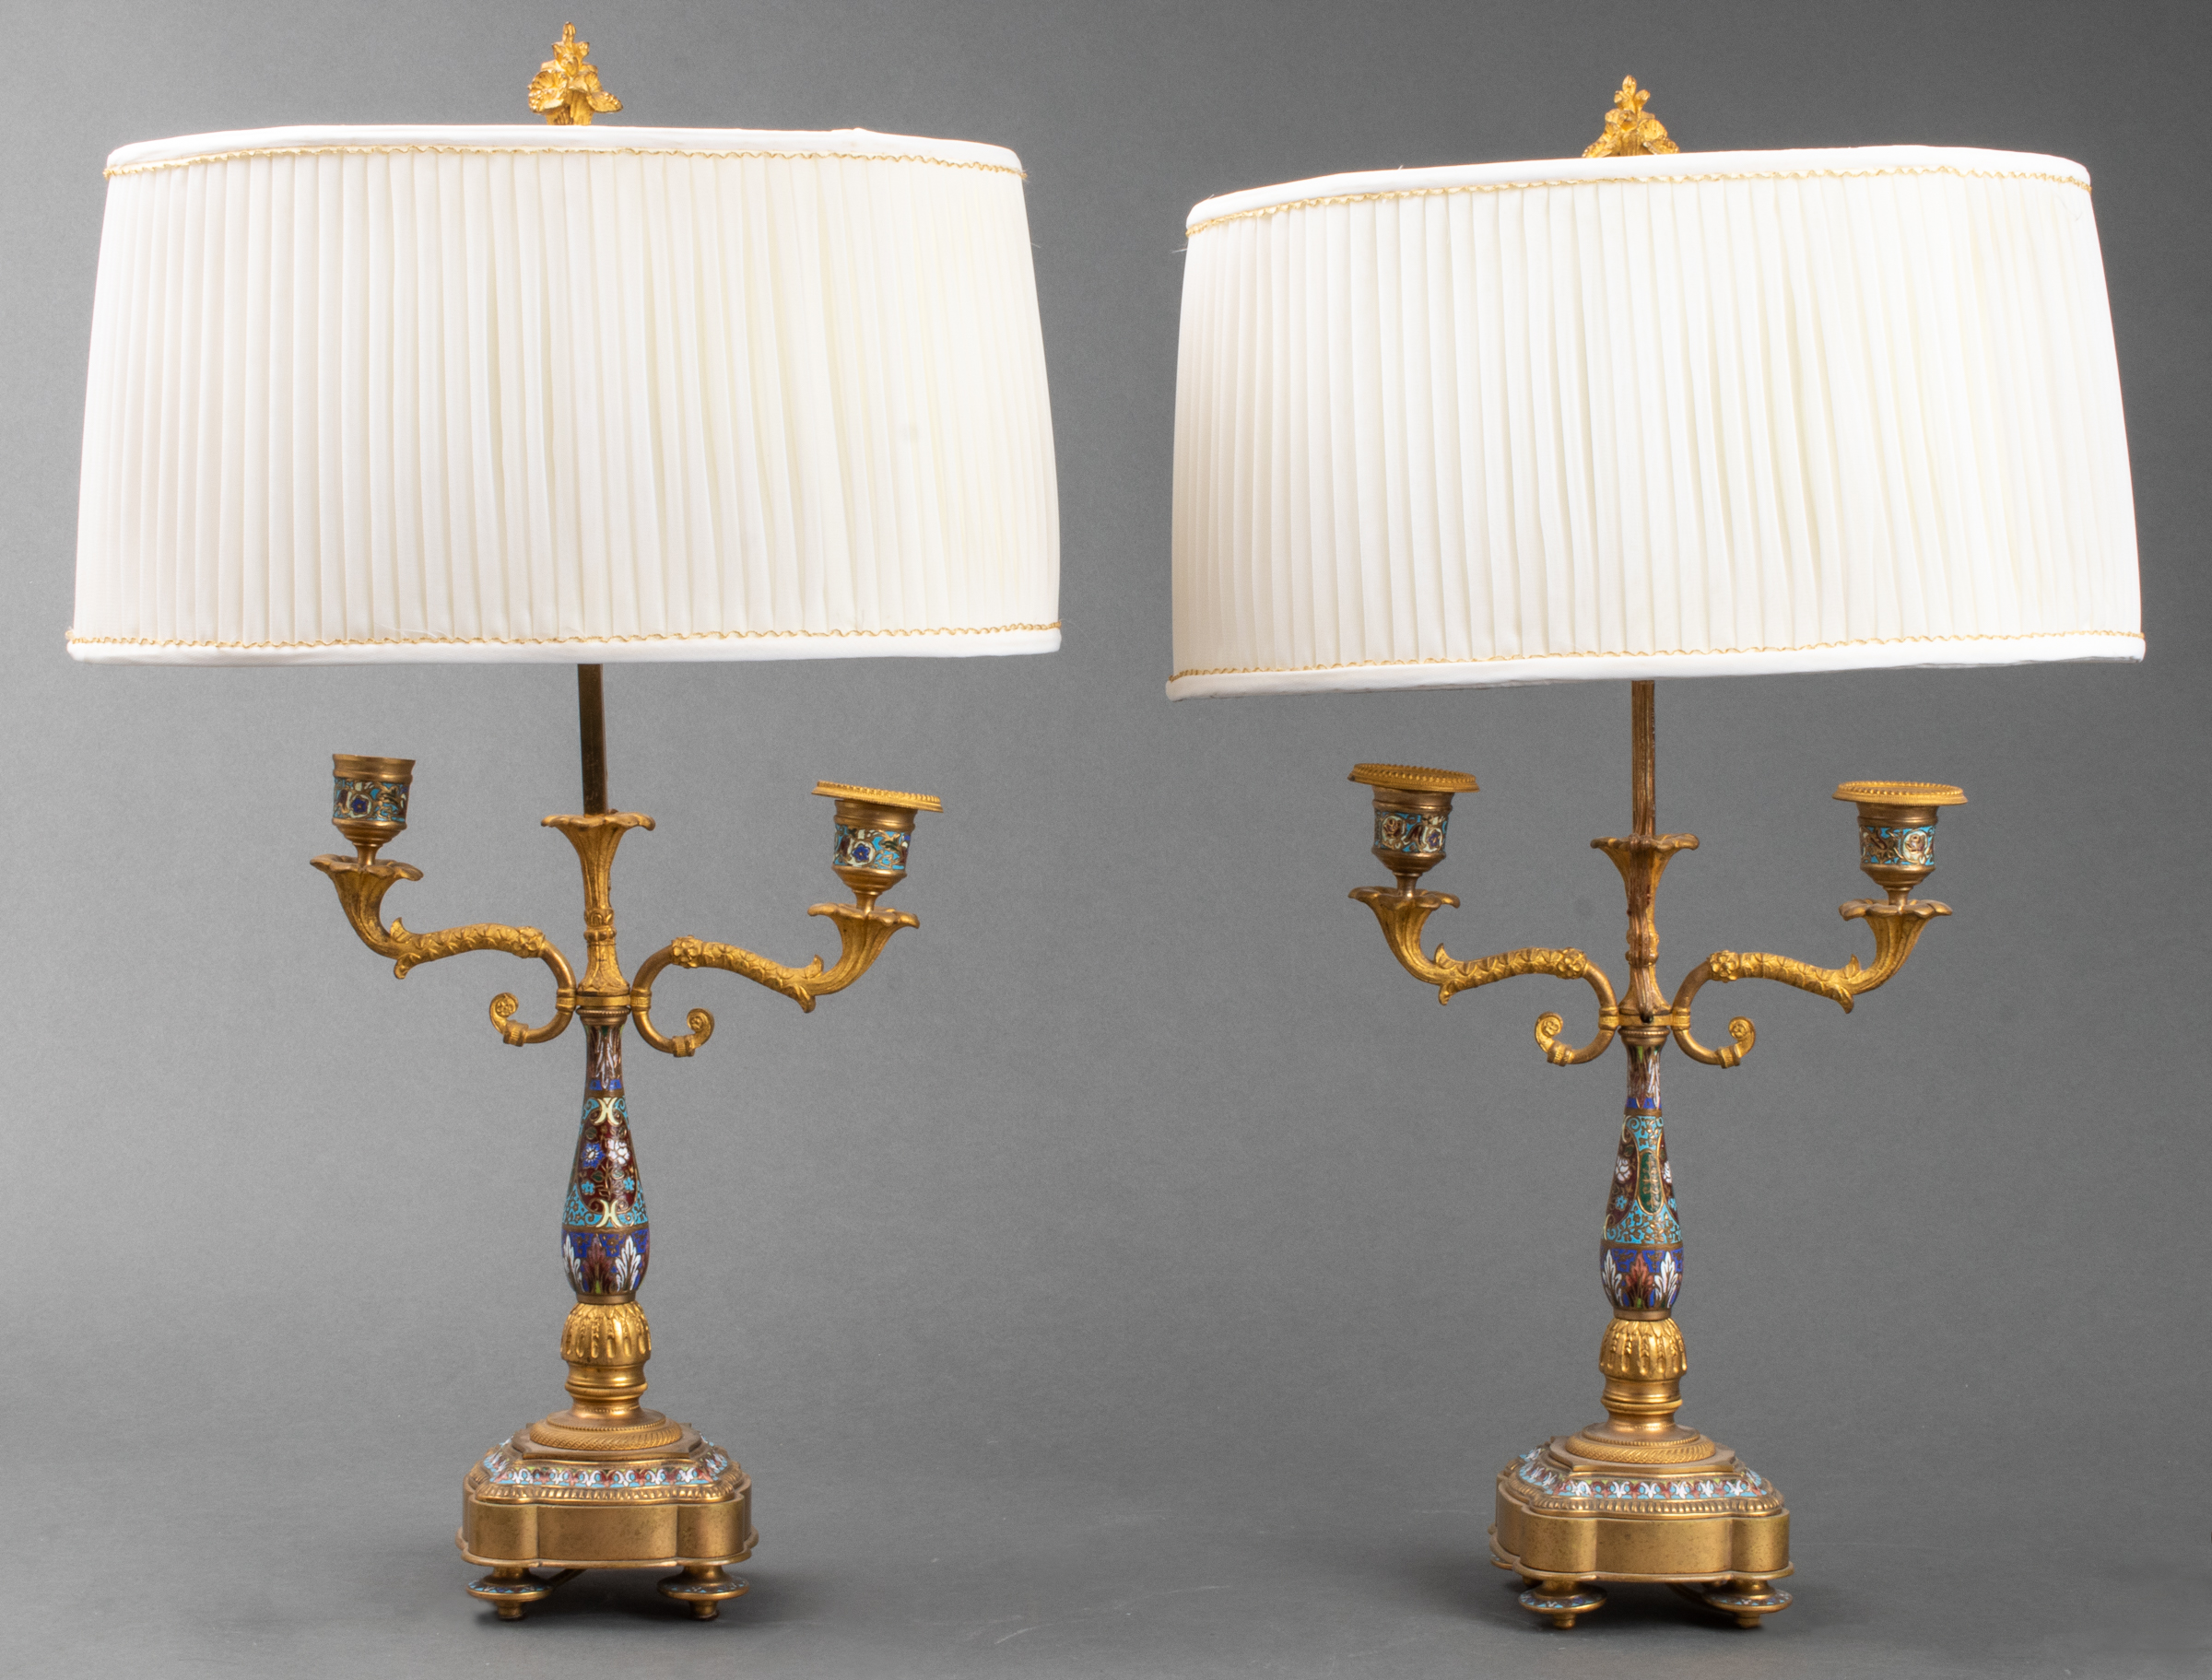 FRENCH GILT AND CLOISONN CANDELABRA 3c33ee